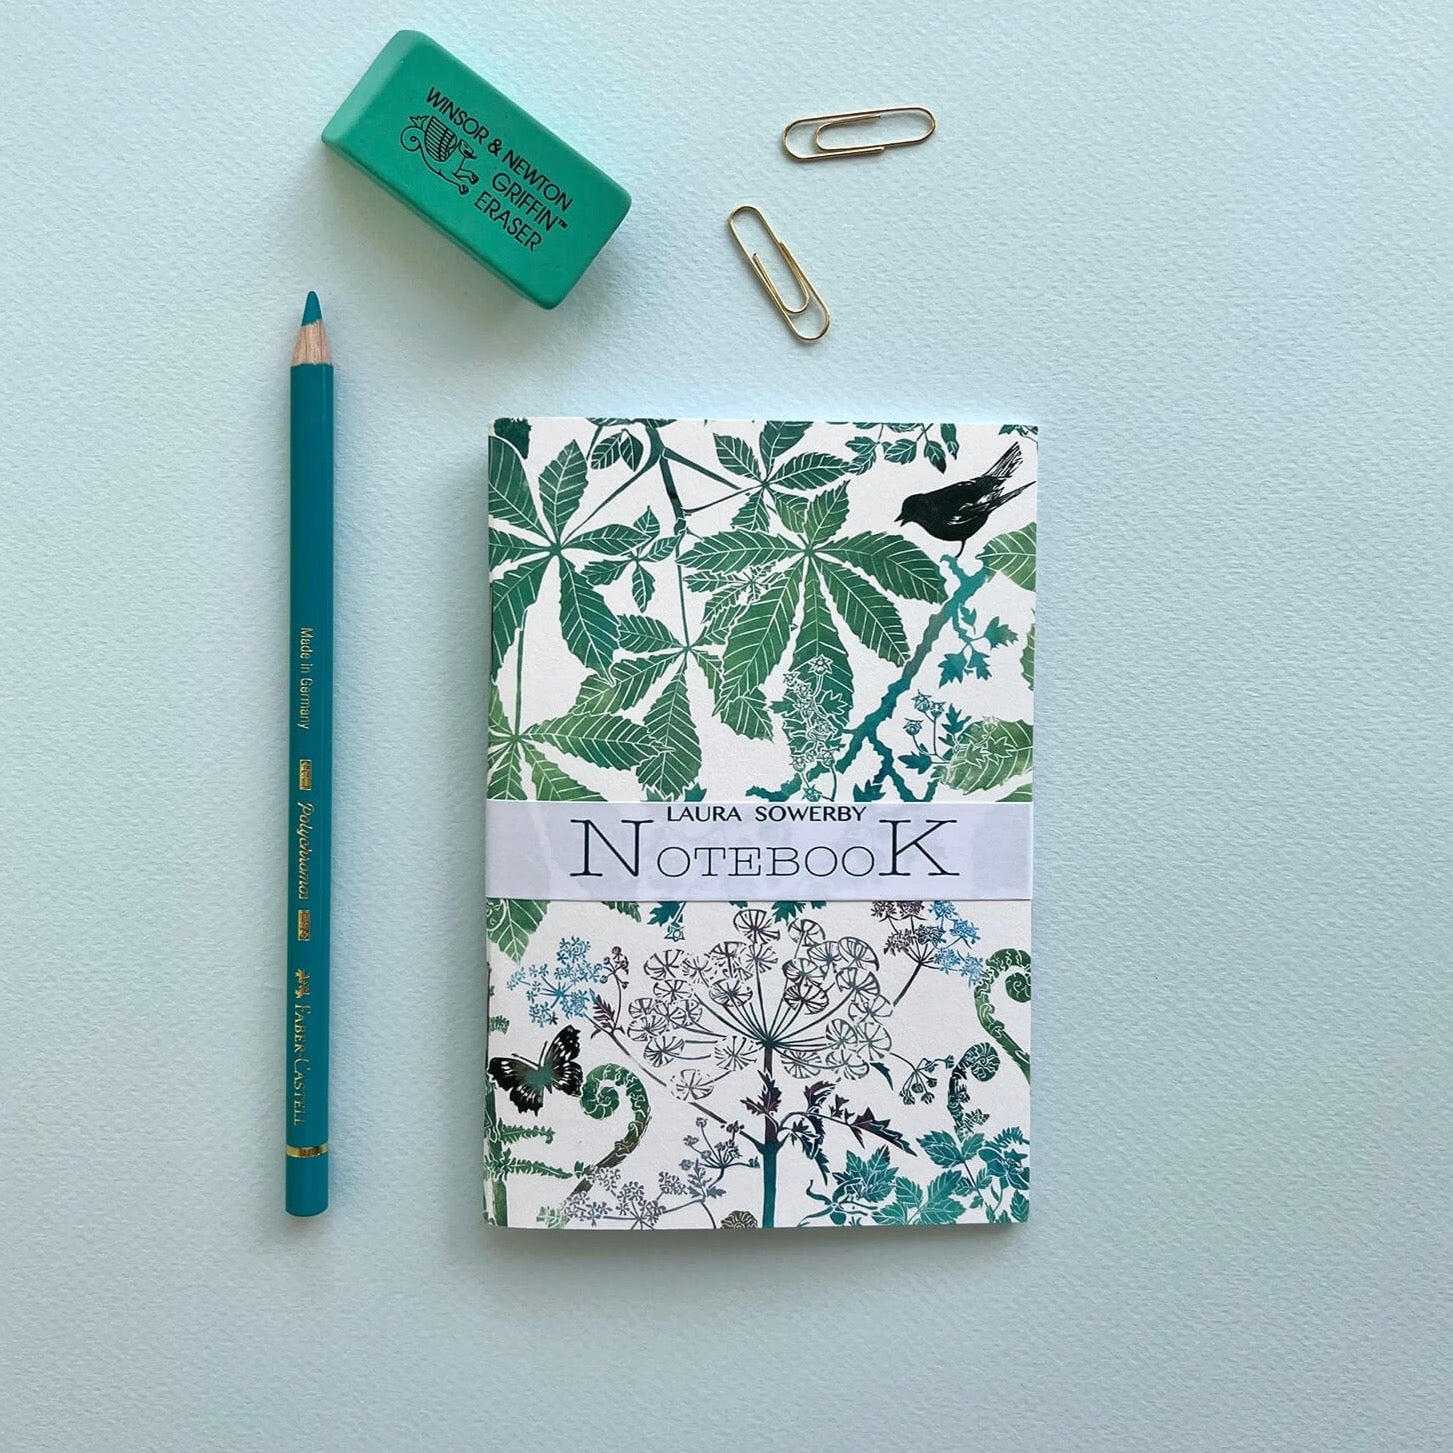 Pocket notebook with lino print cover featuring botanical leaves Bird and cow parsley